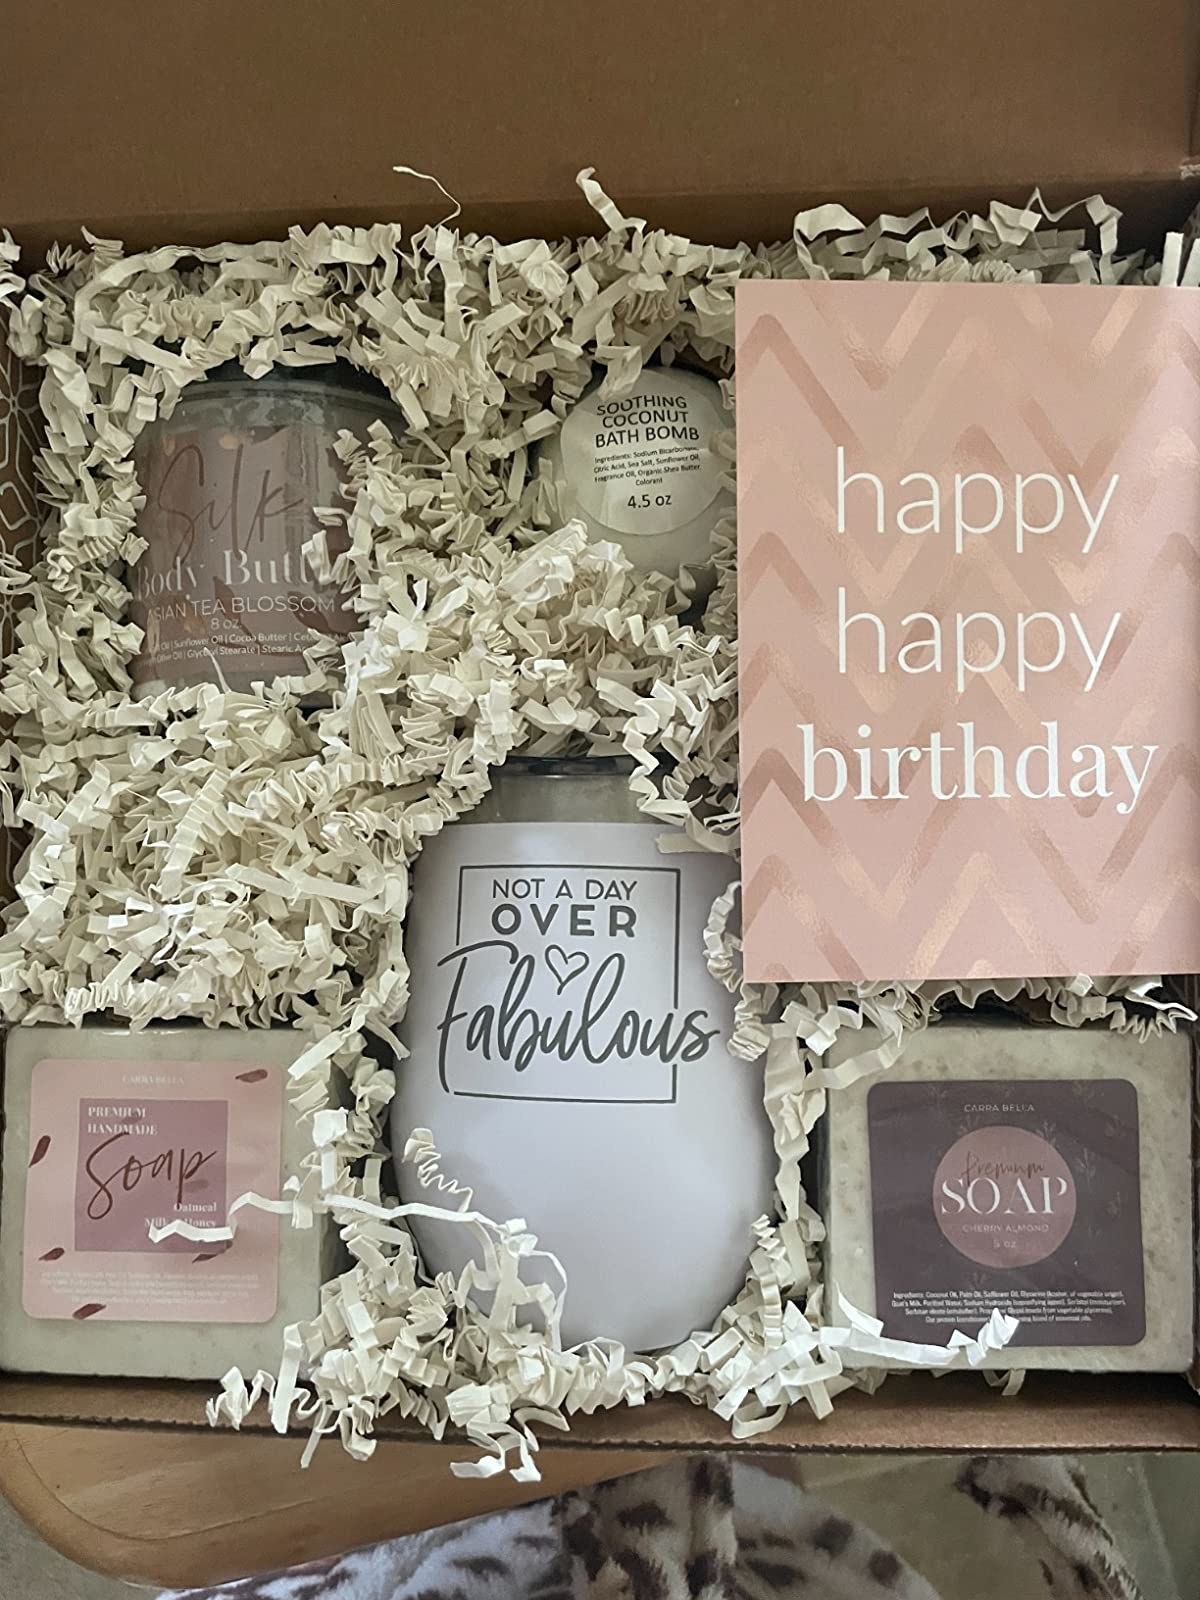 the basket with the two soaps, body butter, bath bomb, wine tumbler and a happy birthday card